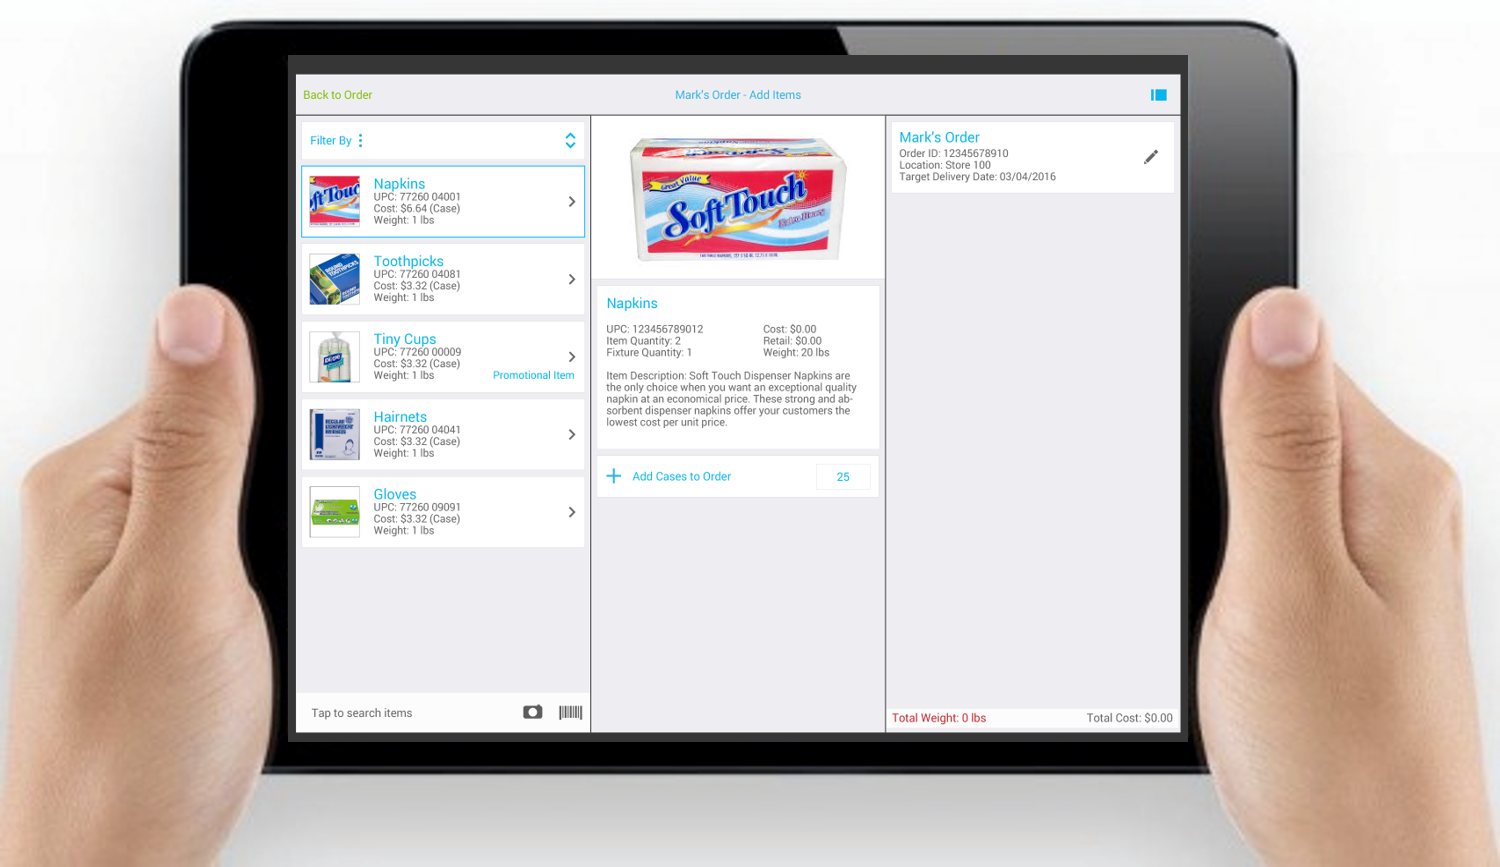 Movista Software - The Item Manager helps ensure product is on the shelves at all times